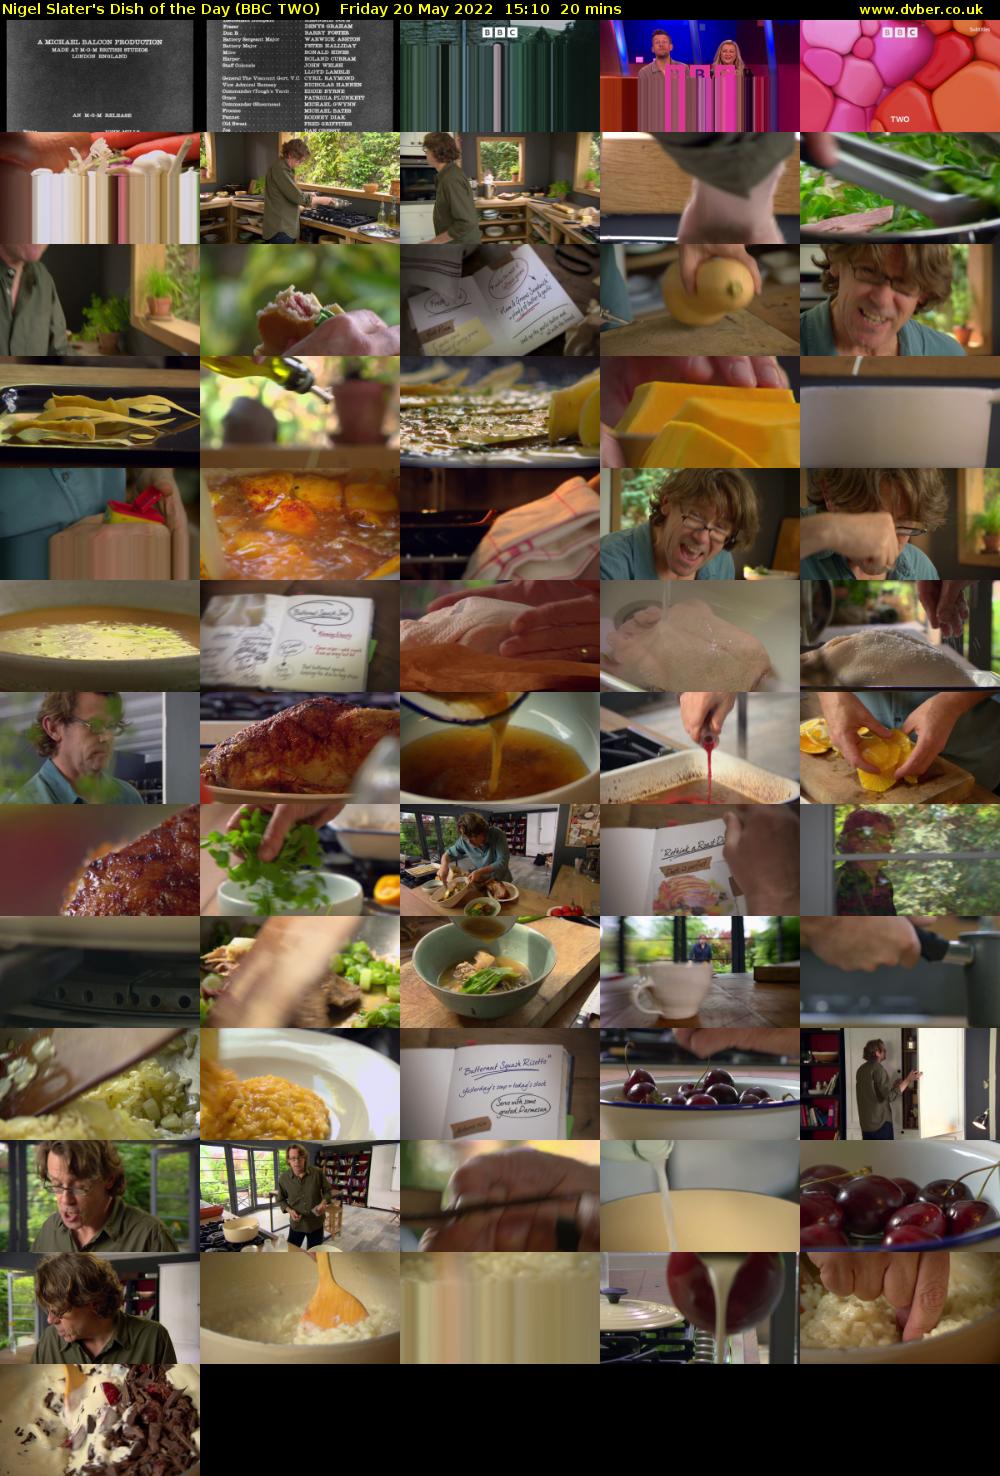 Nigel Slater's Dish of the Day (BBC TWO) Friday 20 May 2022 15:10 - 15:30